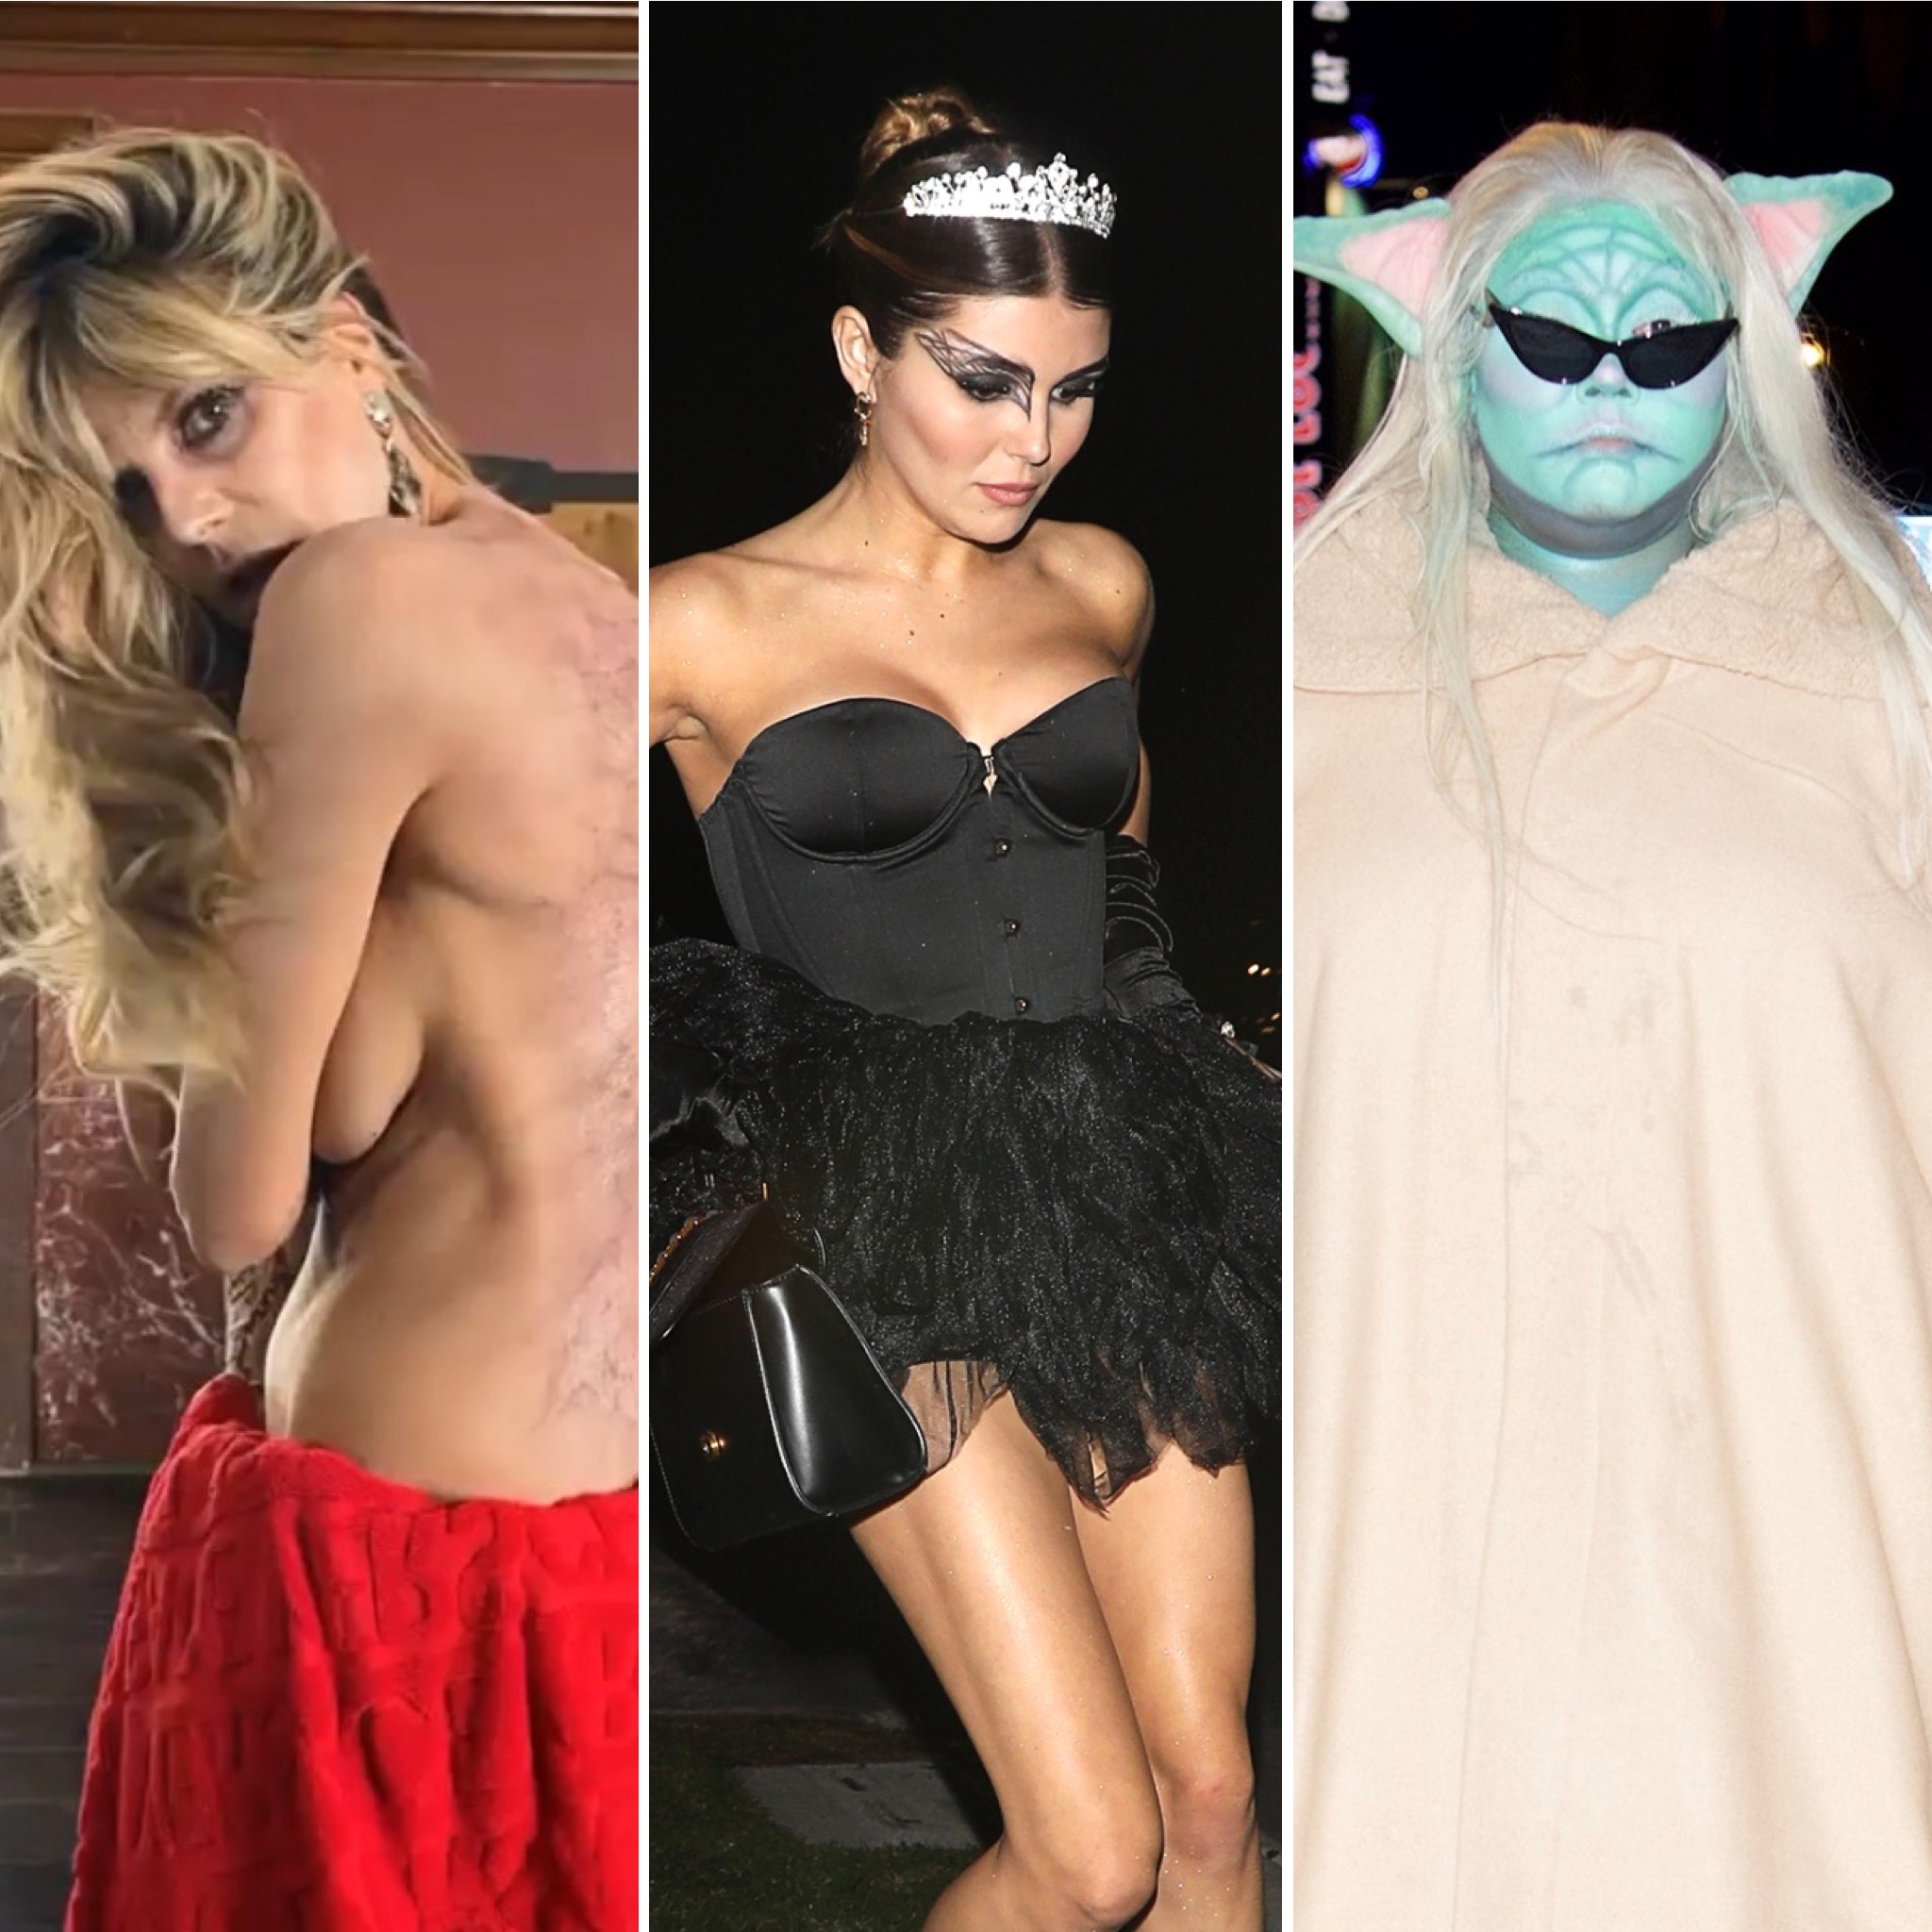 Halloween Office Stocking Sex - Celebrities Dressing Up for Halloween 2021: Photos of Stars' Costumes